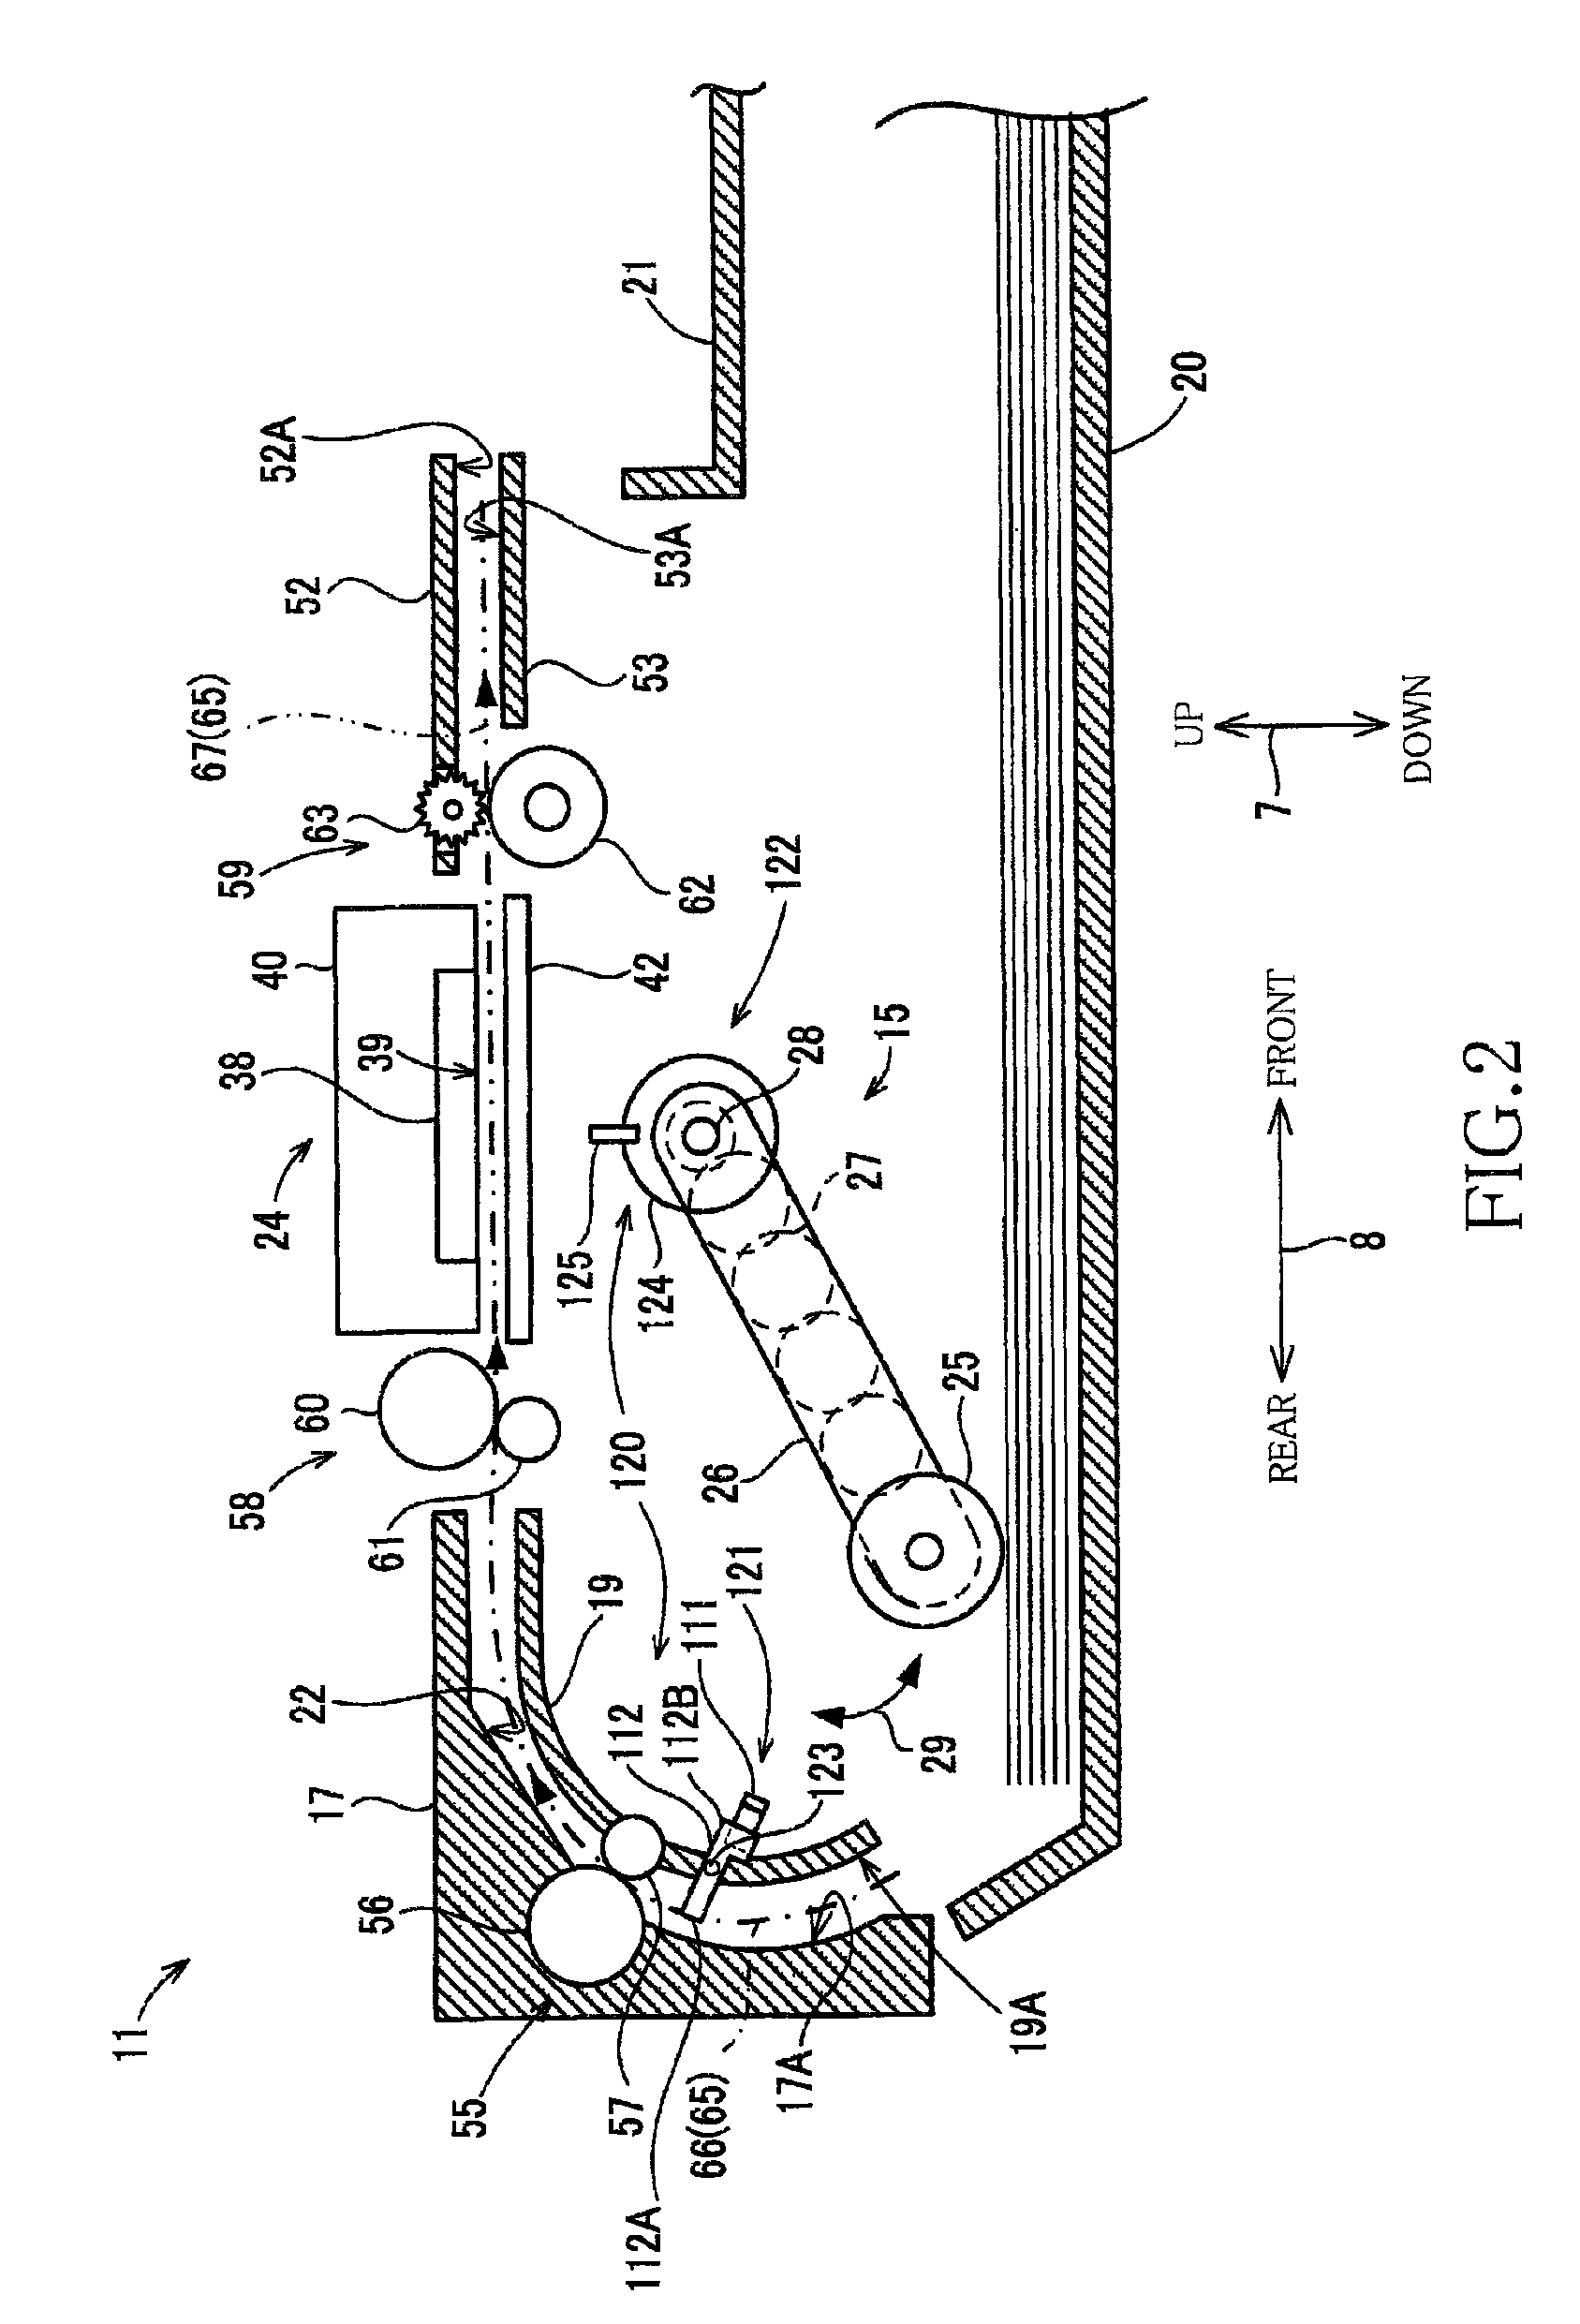 Image recording apparatus with sheet conveyance path